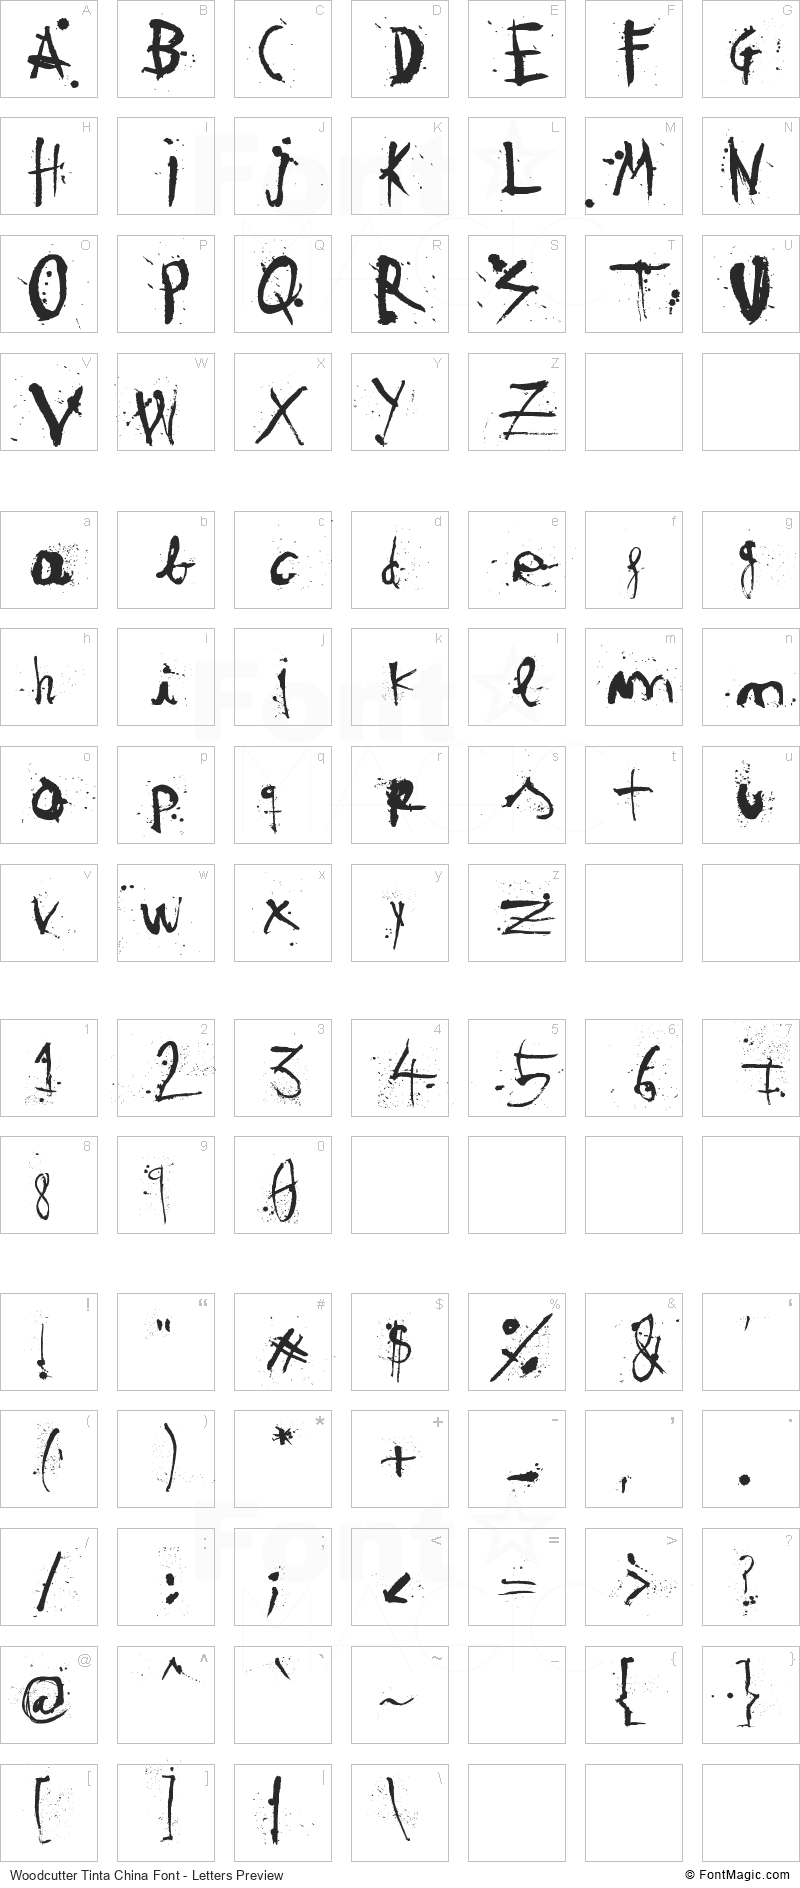 Woodcutter Tinta China Font - All Latters Preview Chart